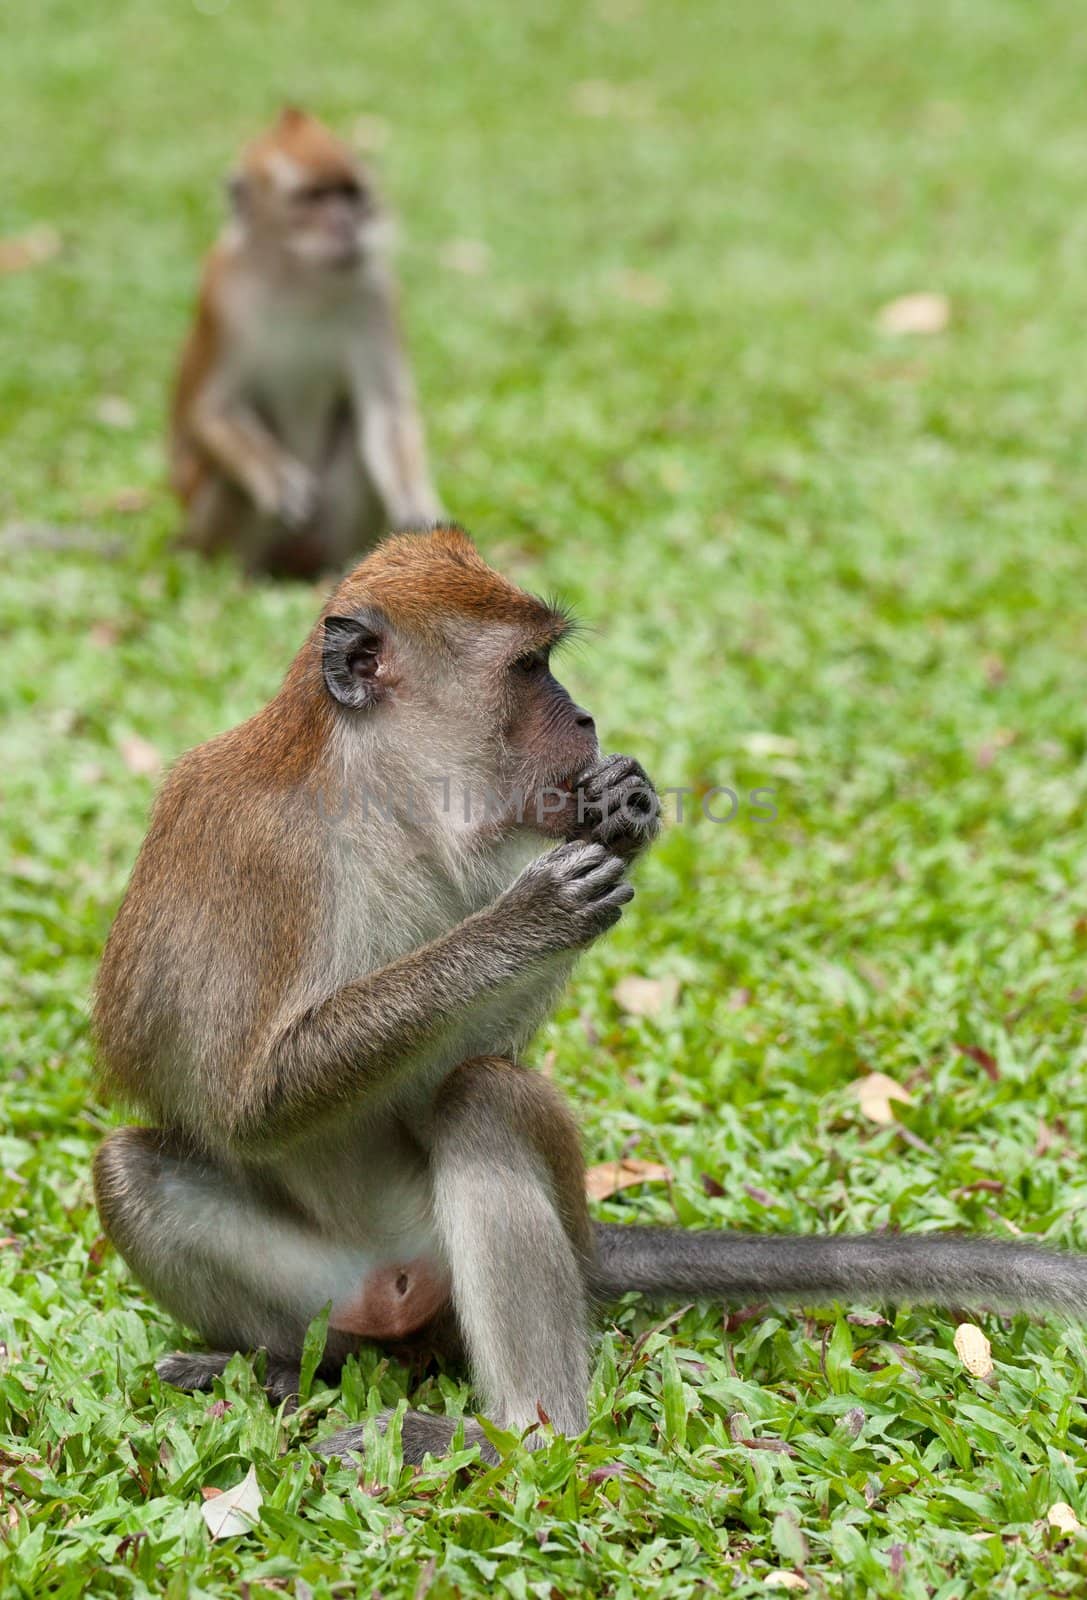 a small macaque monkey in penang malaysia